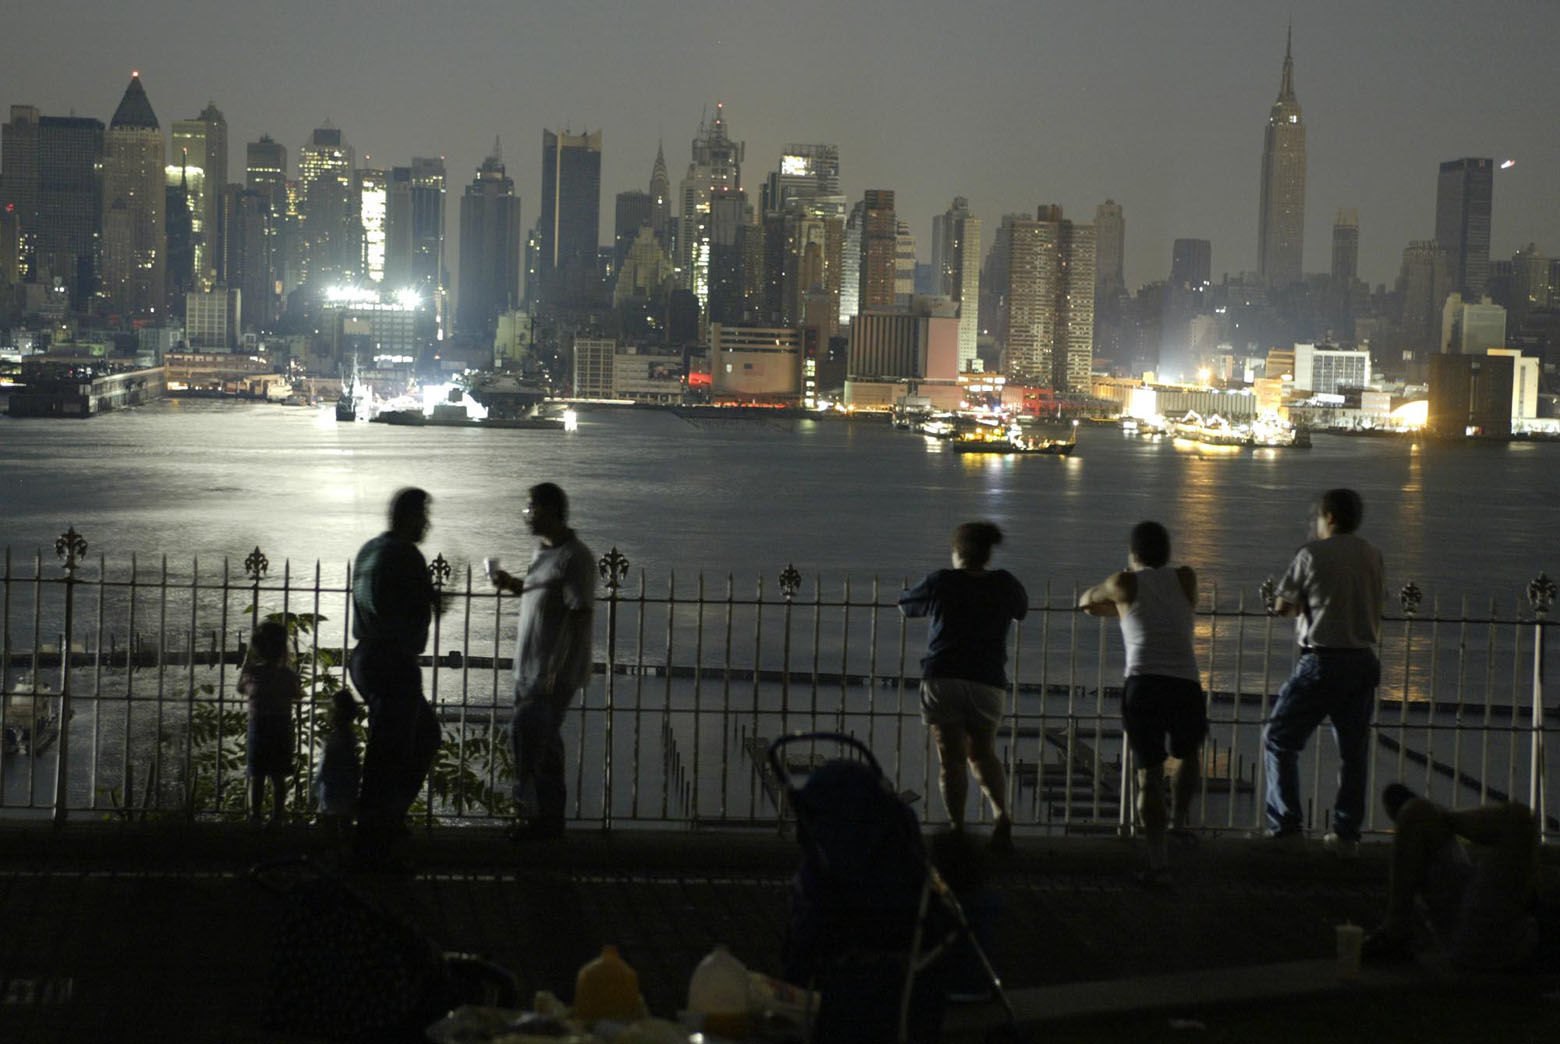 A view of the Upper West side of Manhattan is seen from a Weehawken, N.J.  park Thursday, Aug. 14, 2003.  The largest power blackout in U.S. history rolled across a vast swath of the northern United States as well as southern Canada on Thursday, driving millions of people outdoors into stifling rush hour streets, then darkness. (AP Photo/George Widman)